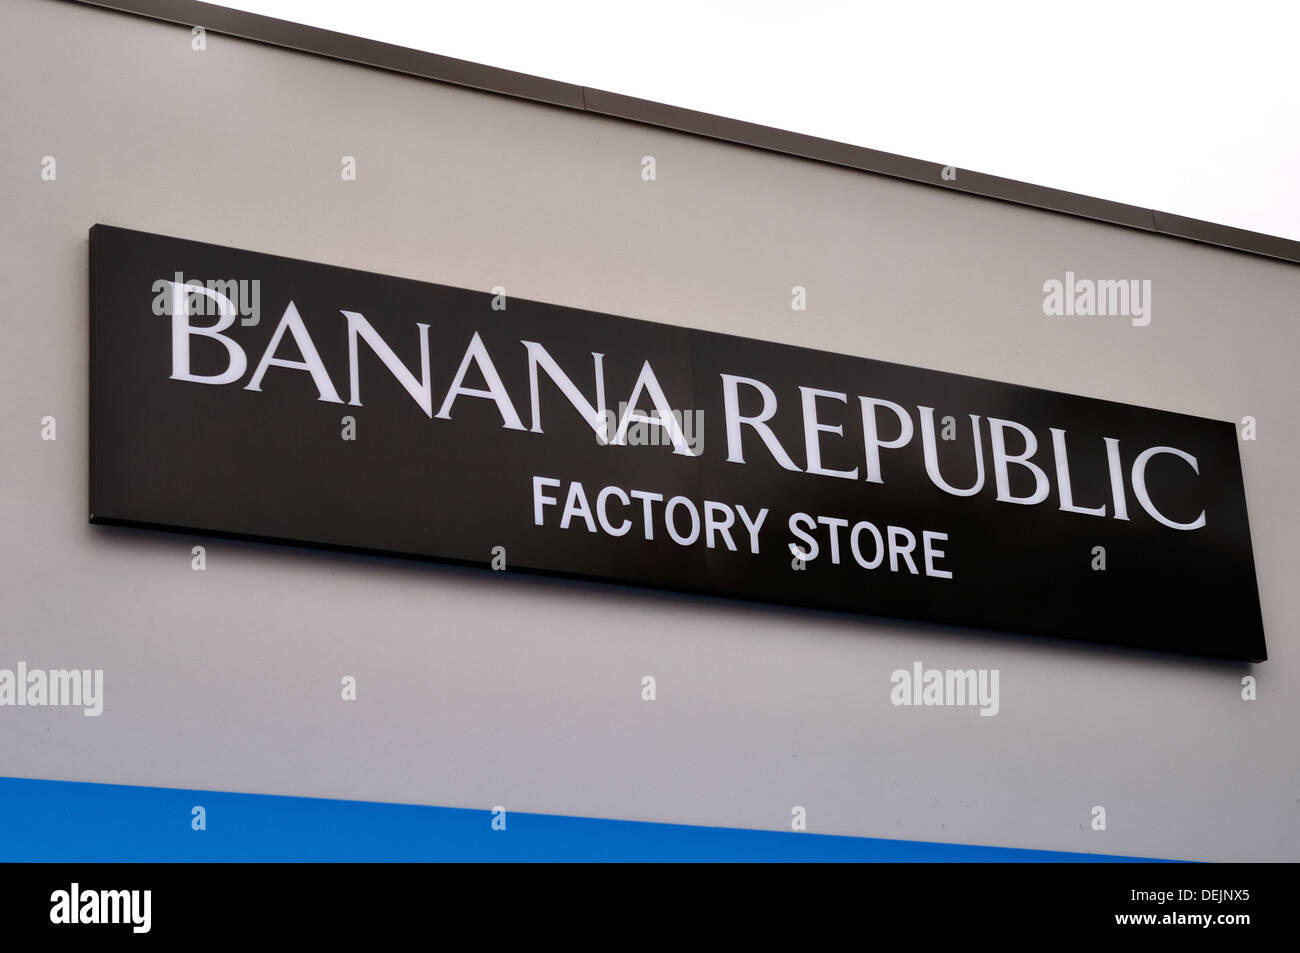 Factory outlet store for Banana Republic. Stock Photo